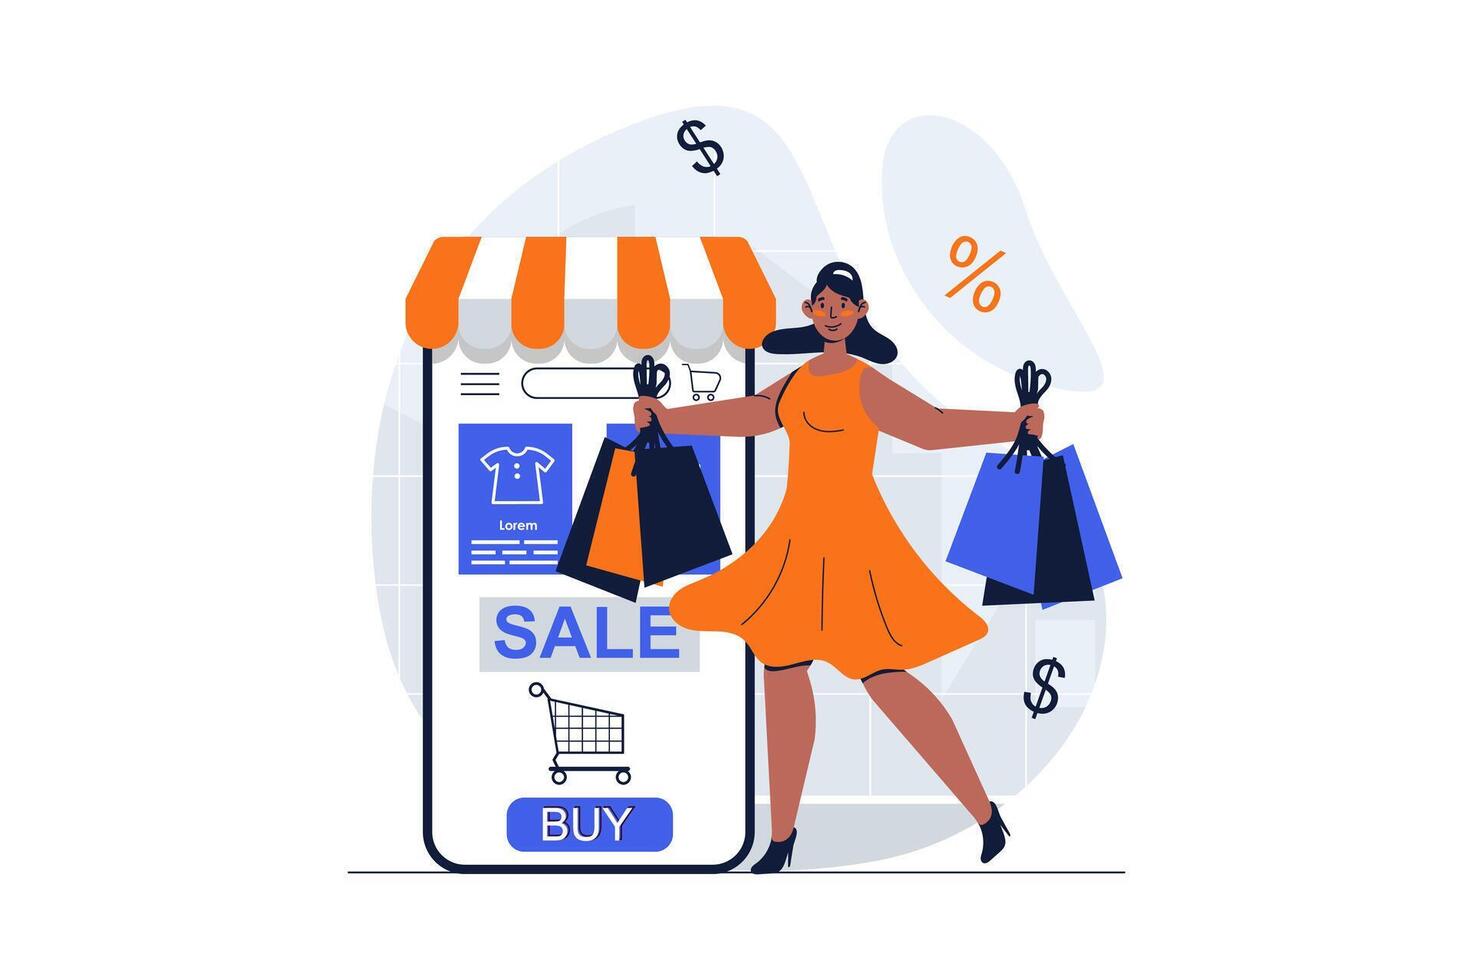 Shopping web concept with character scene. Woman making purchases and ordering online in mobile application. People situation in flat design. Vector illustration for social media marketing material.